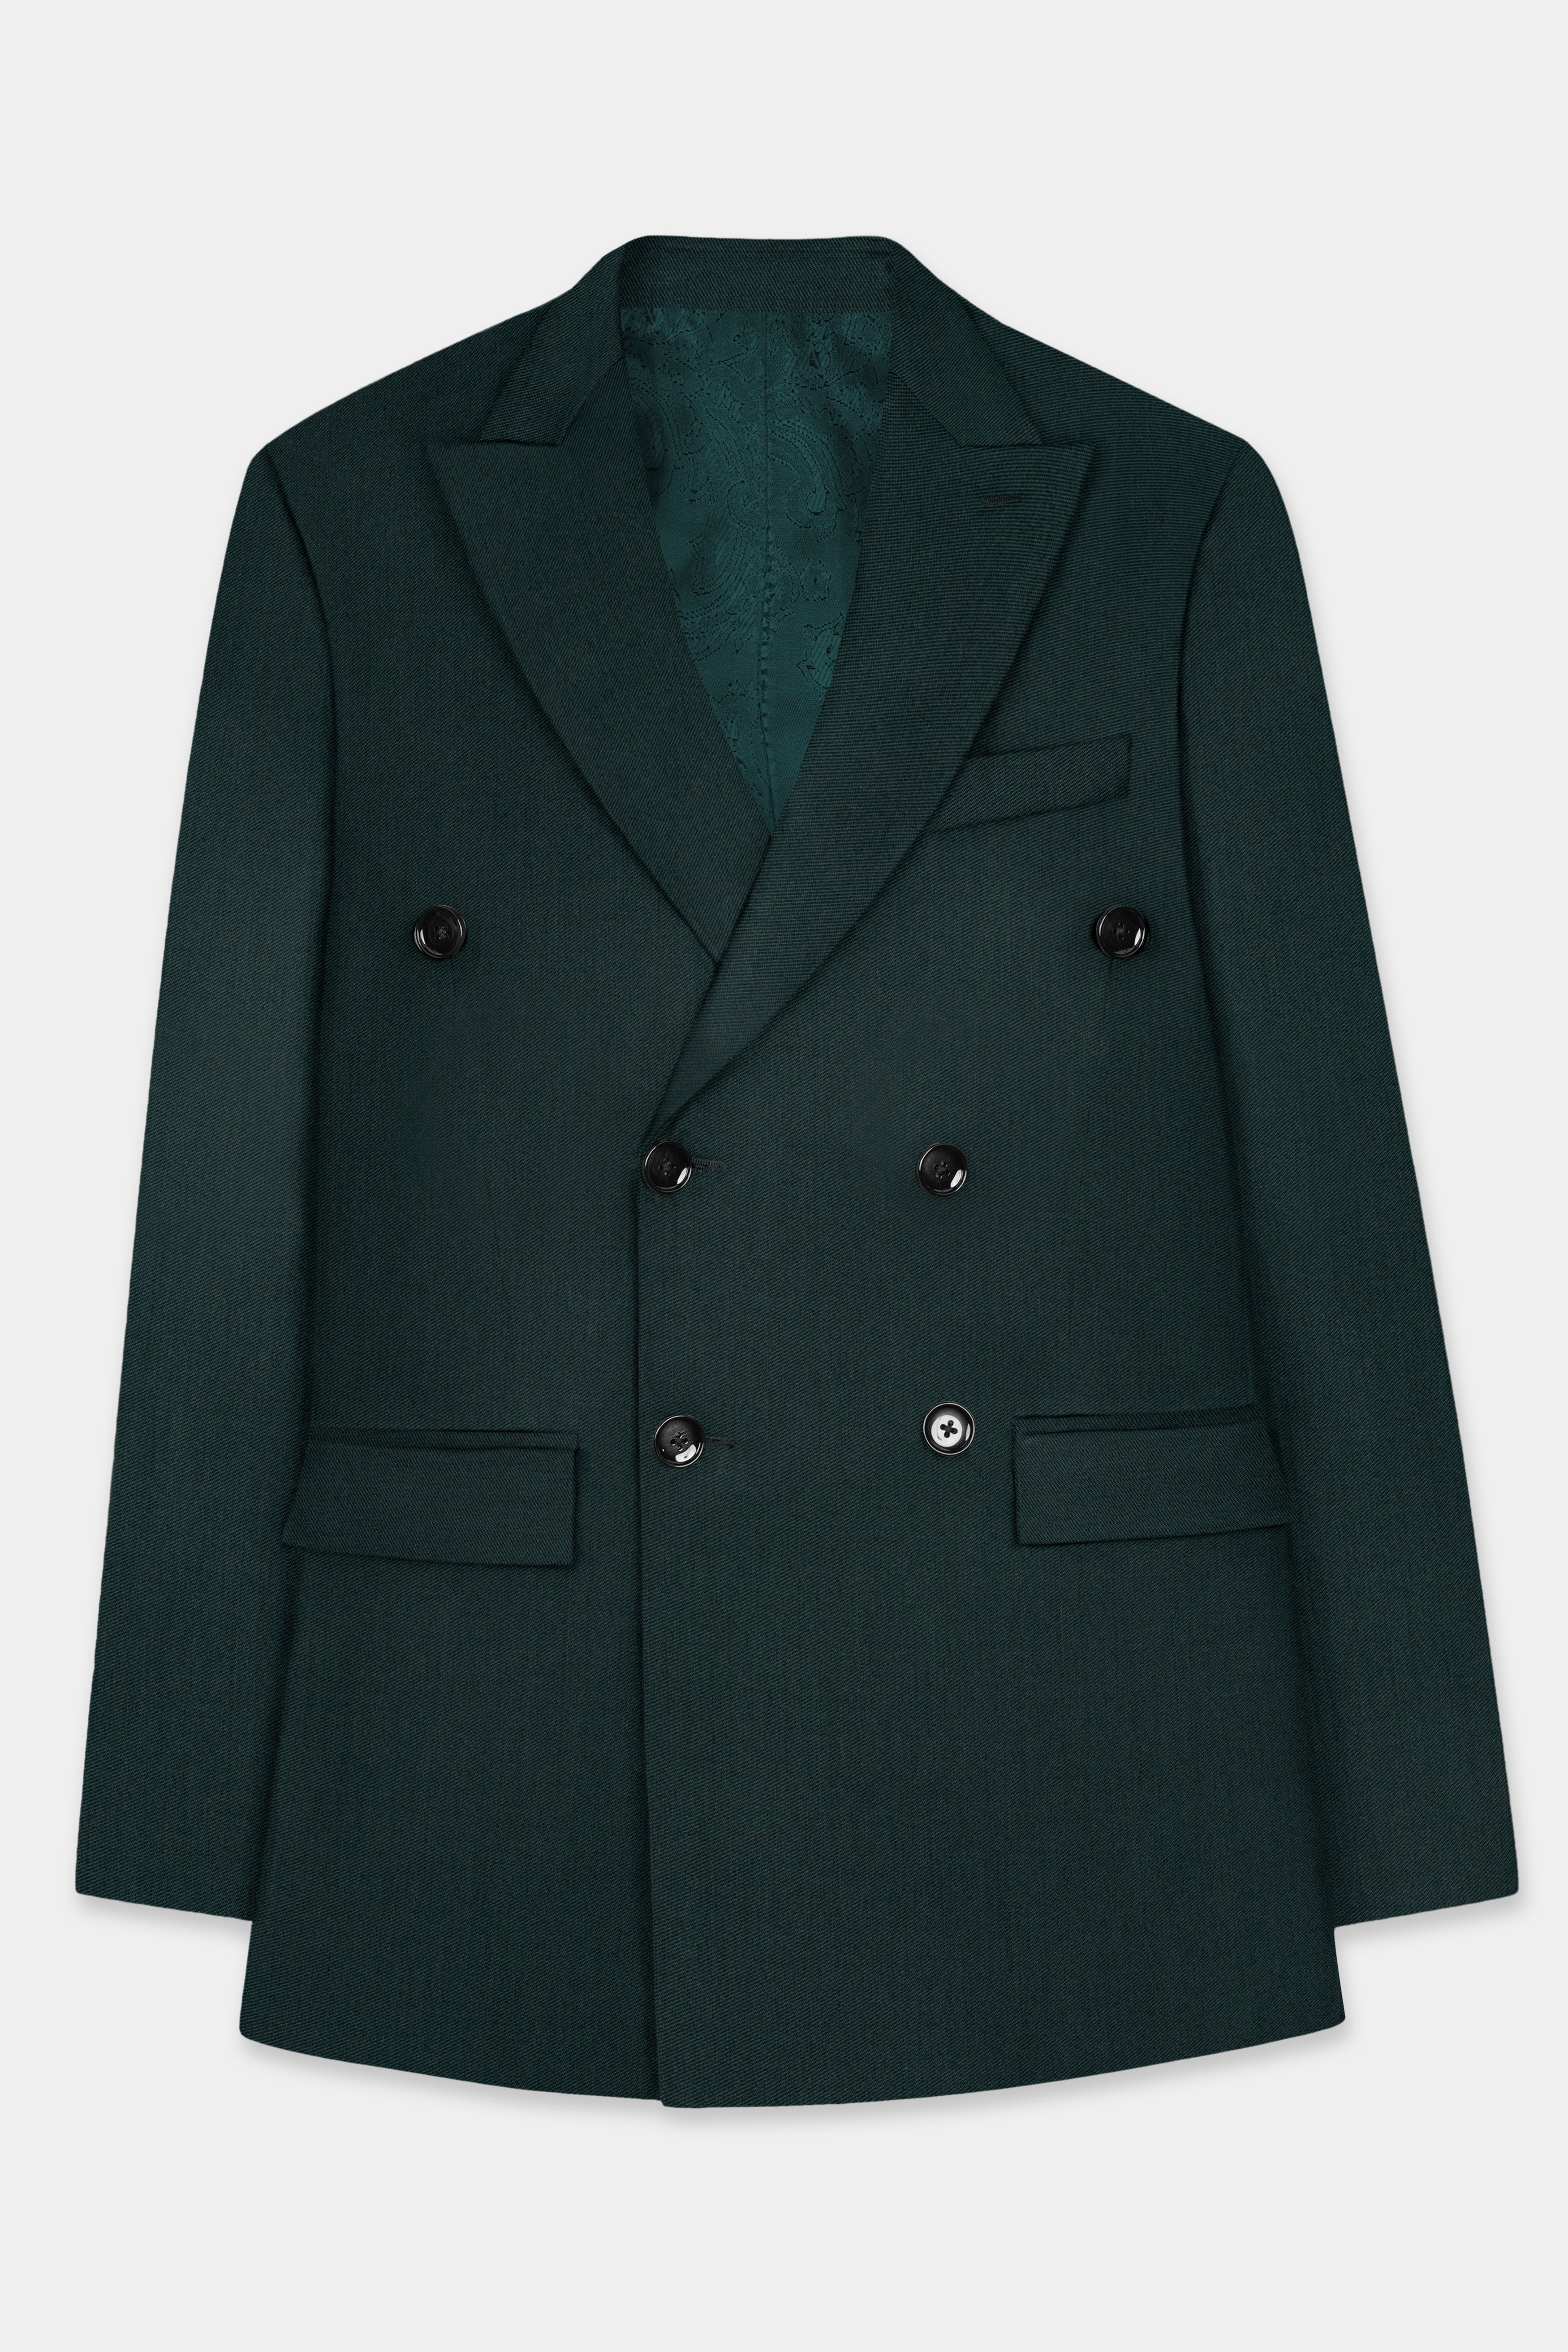 Timber Green Wool Rich Double Breasted Blazer